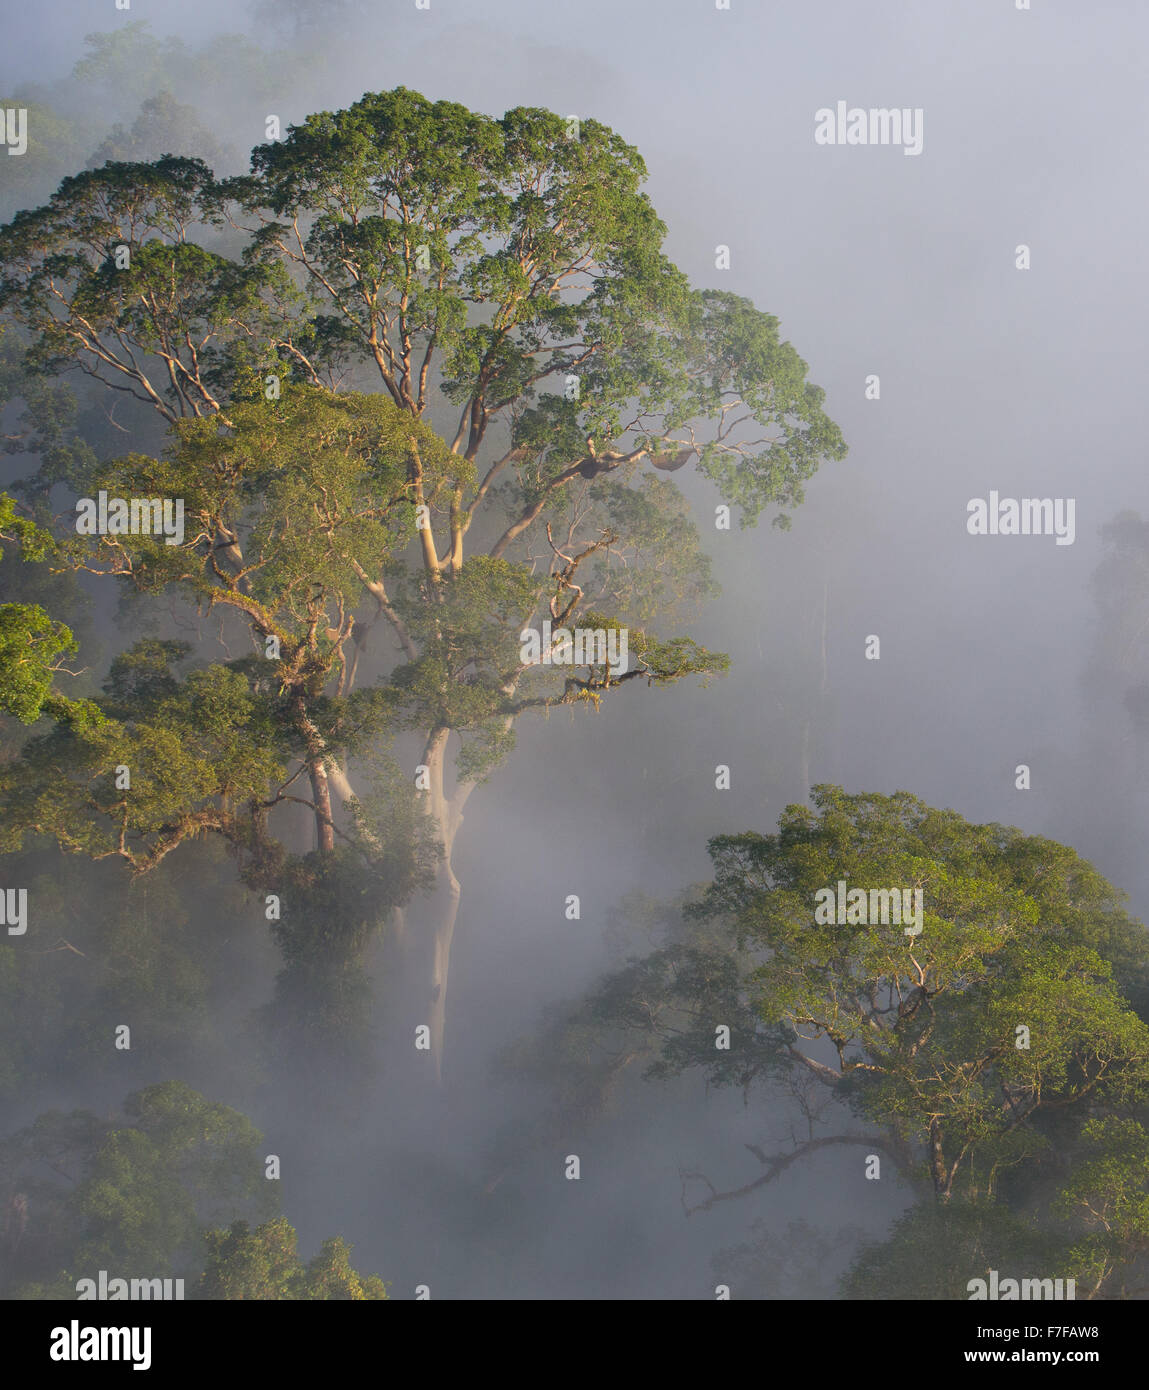 Early Morning mist rising nella foresta pluviale tropicale, Danum Valley, Sabah, Malaysia Foto Stock